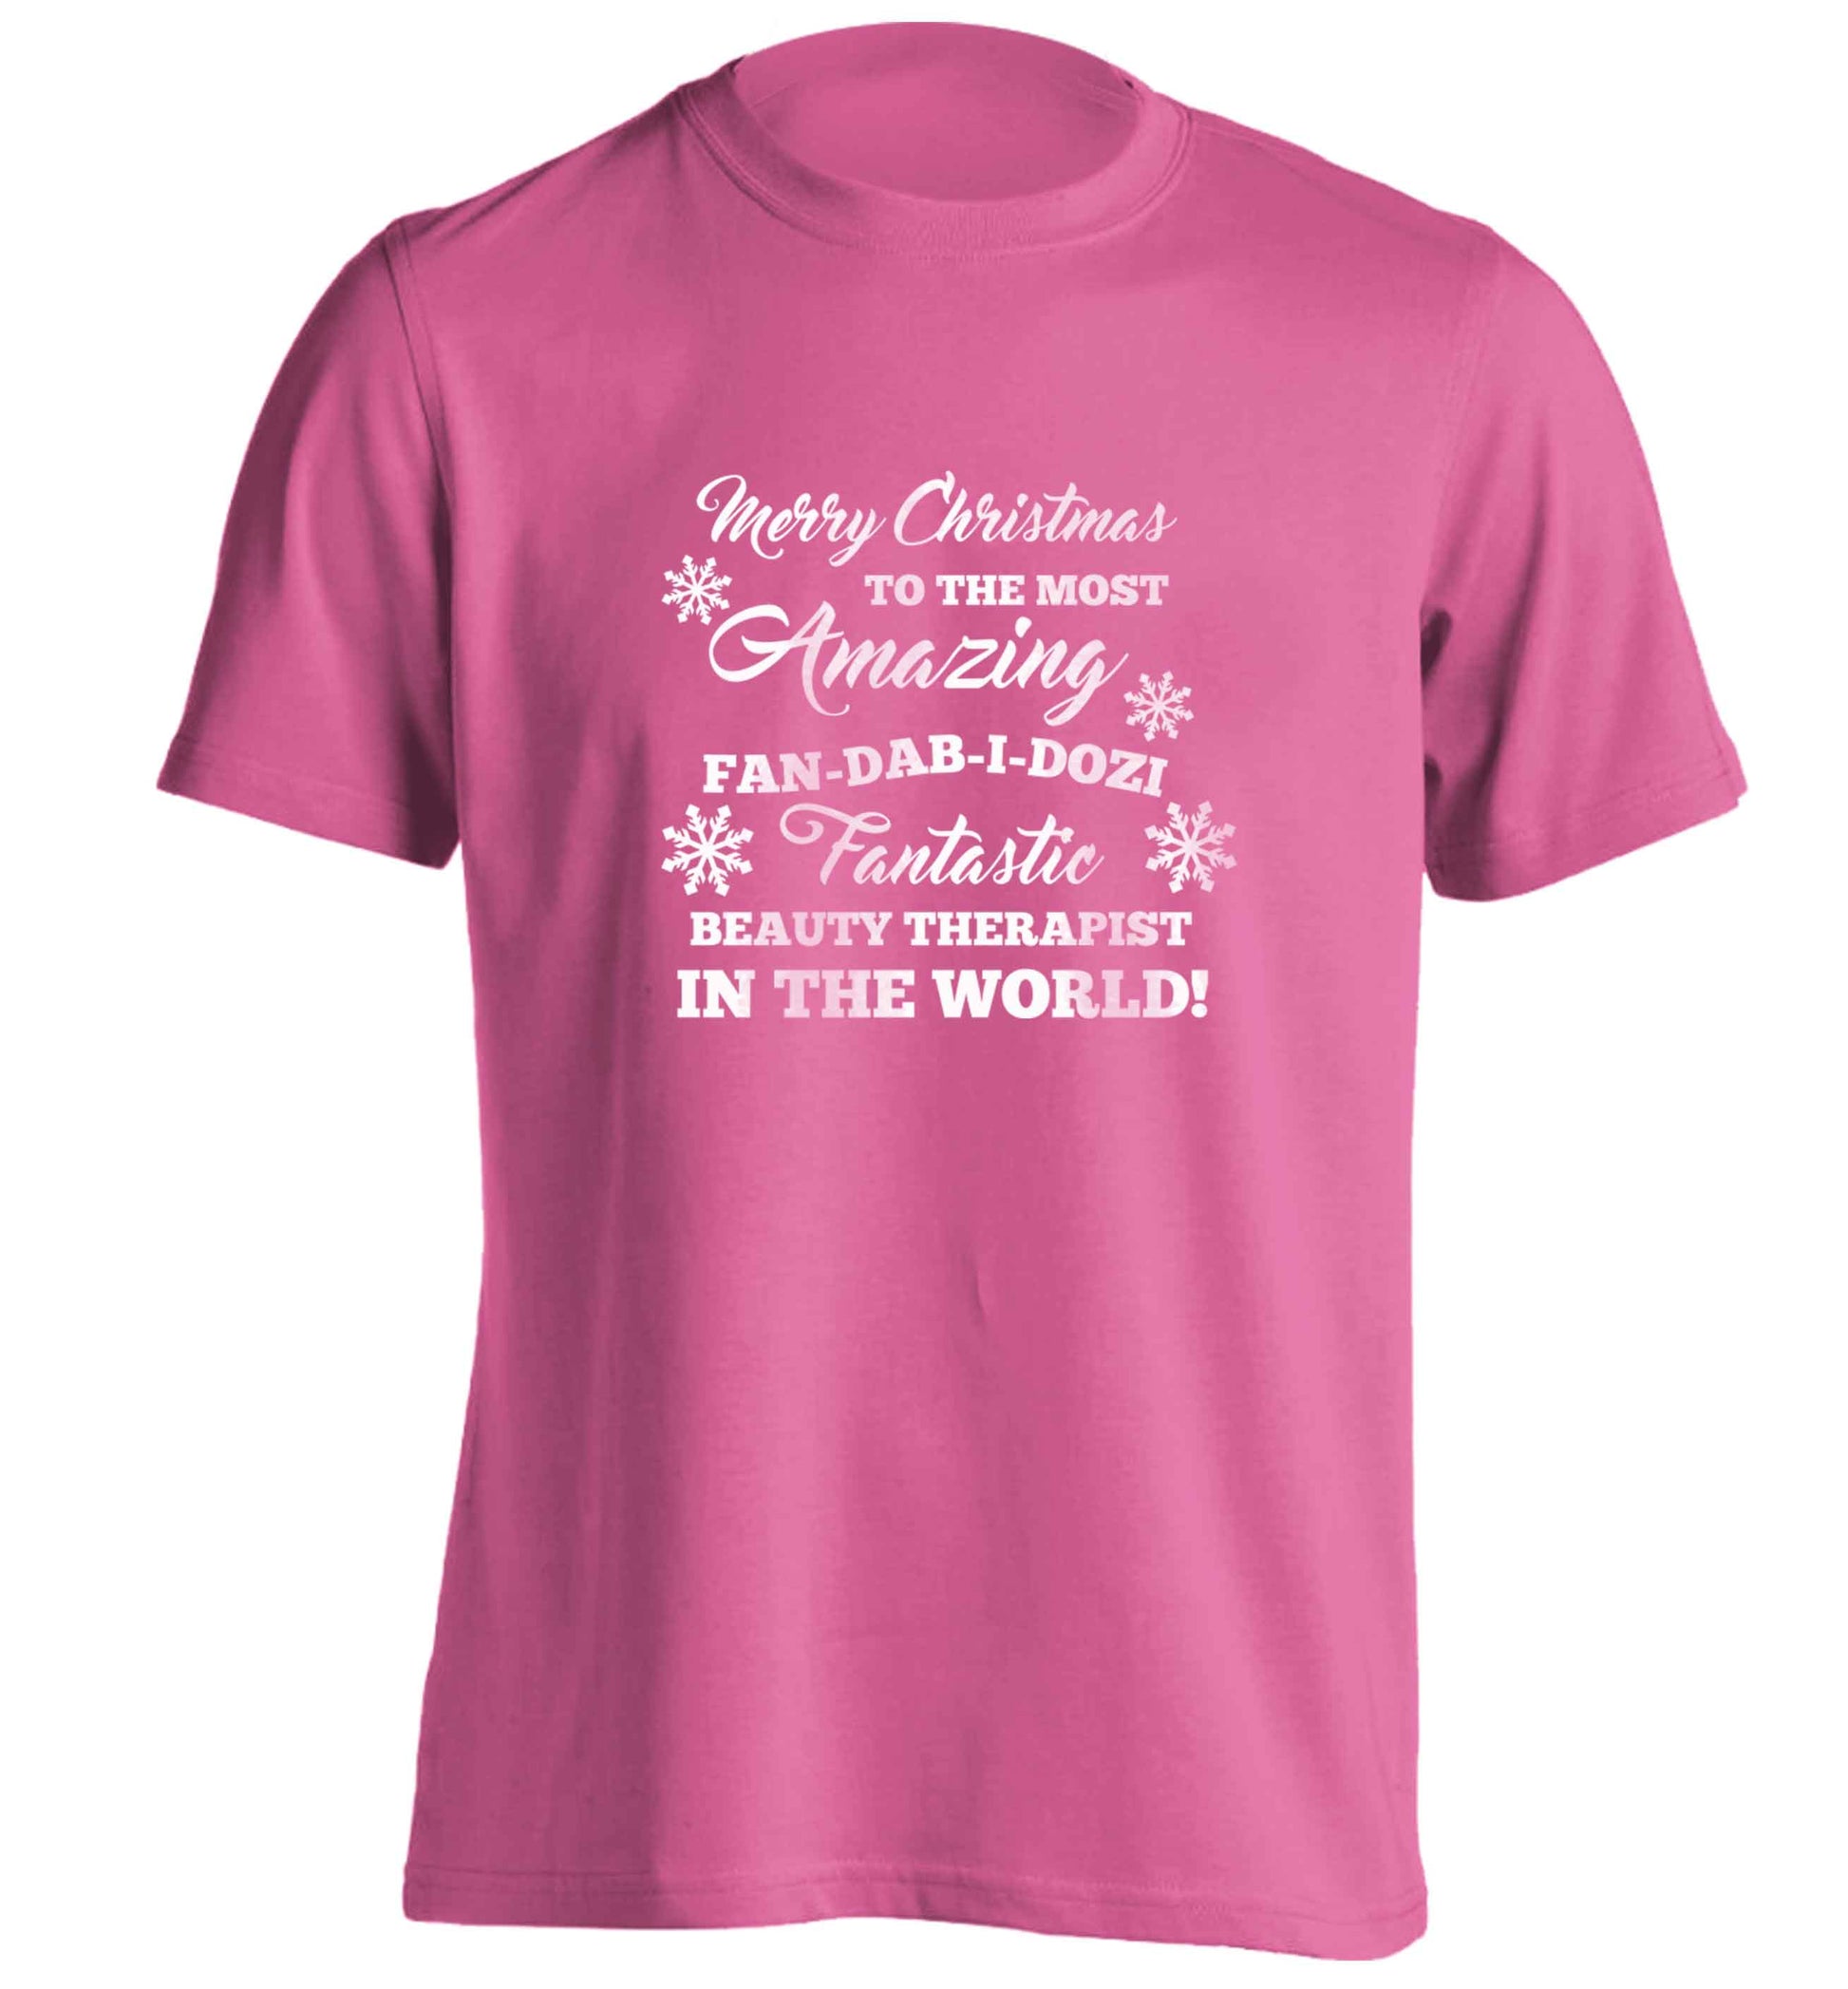 Merry Christmas to the most amazing fan-dab-i-dozi fantasic beauty therapist in the world adults unisex pink Tshirt 2XL